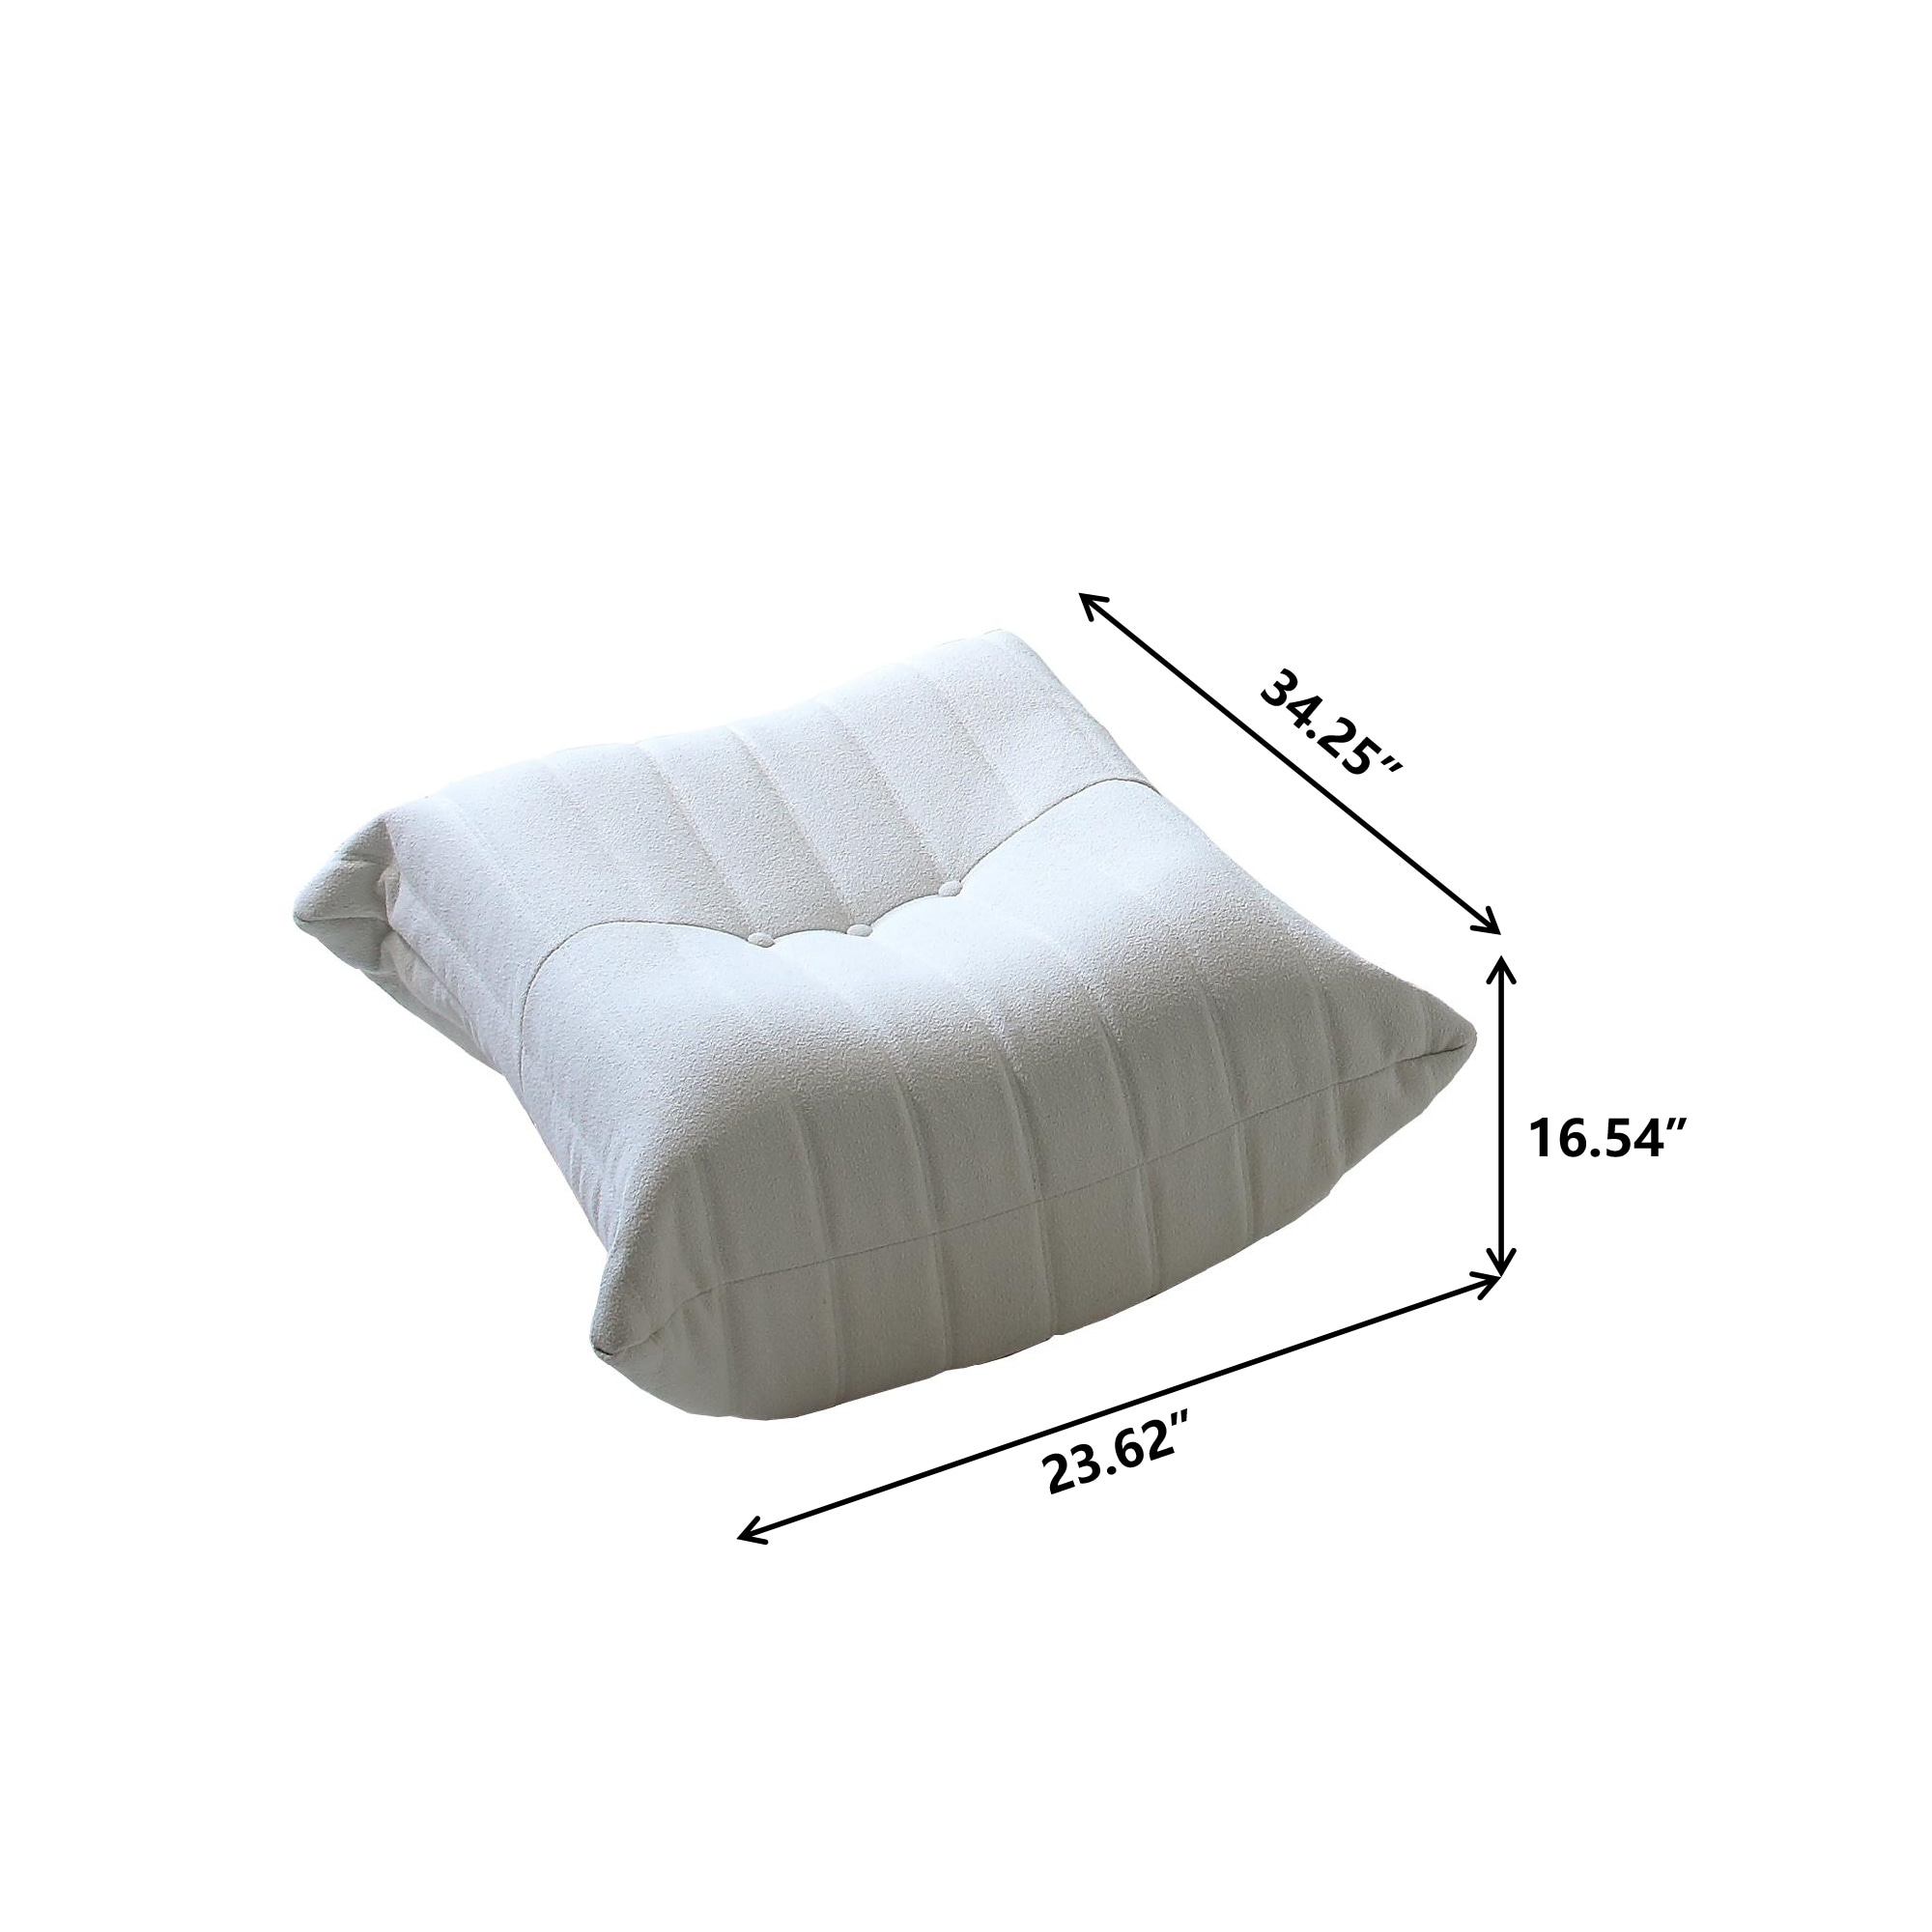 https://ak1.ostkcdn.com/images/products/is/images/direct/154e82fff8c1854b5e3784a040588277e737f03b/Memory-Foam-Floor-Chair%2C-Comfortable-Back-Support-Lazy-Sofa%2C-Comfy-for-Reading-Game-Meditating%2CTeddy-Fabric.jpg